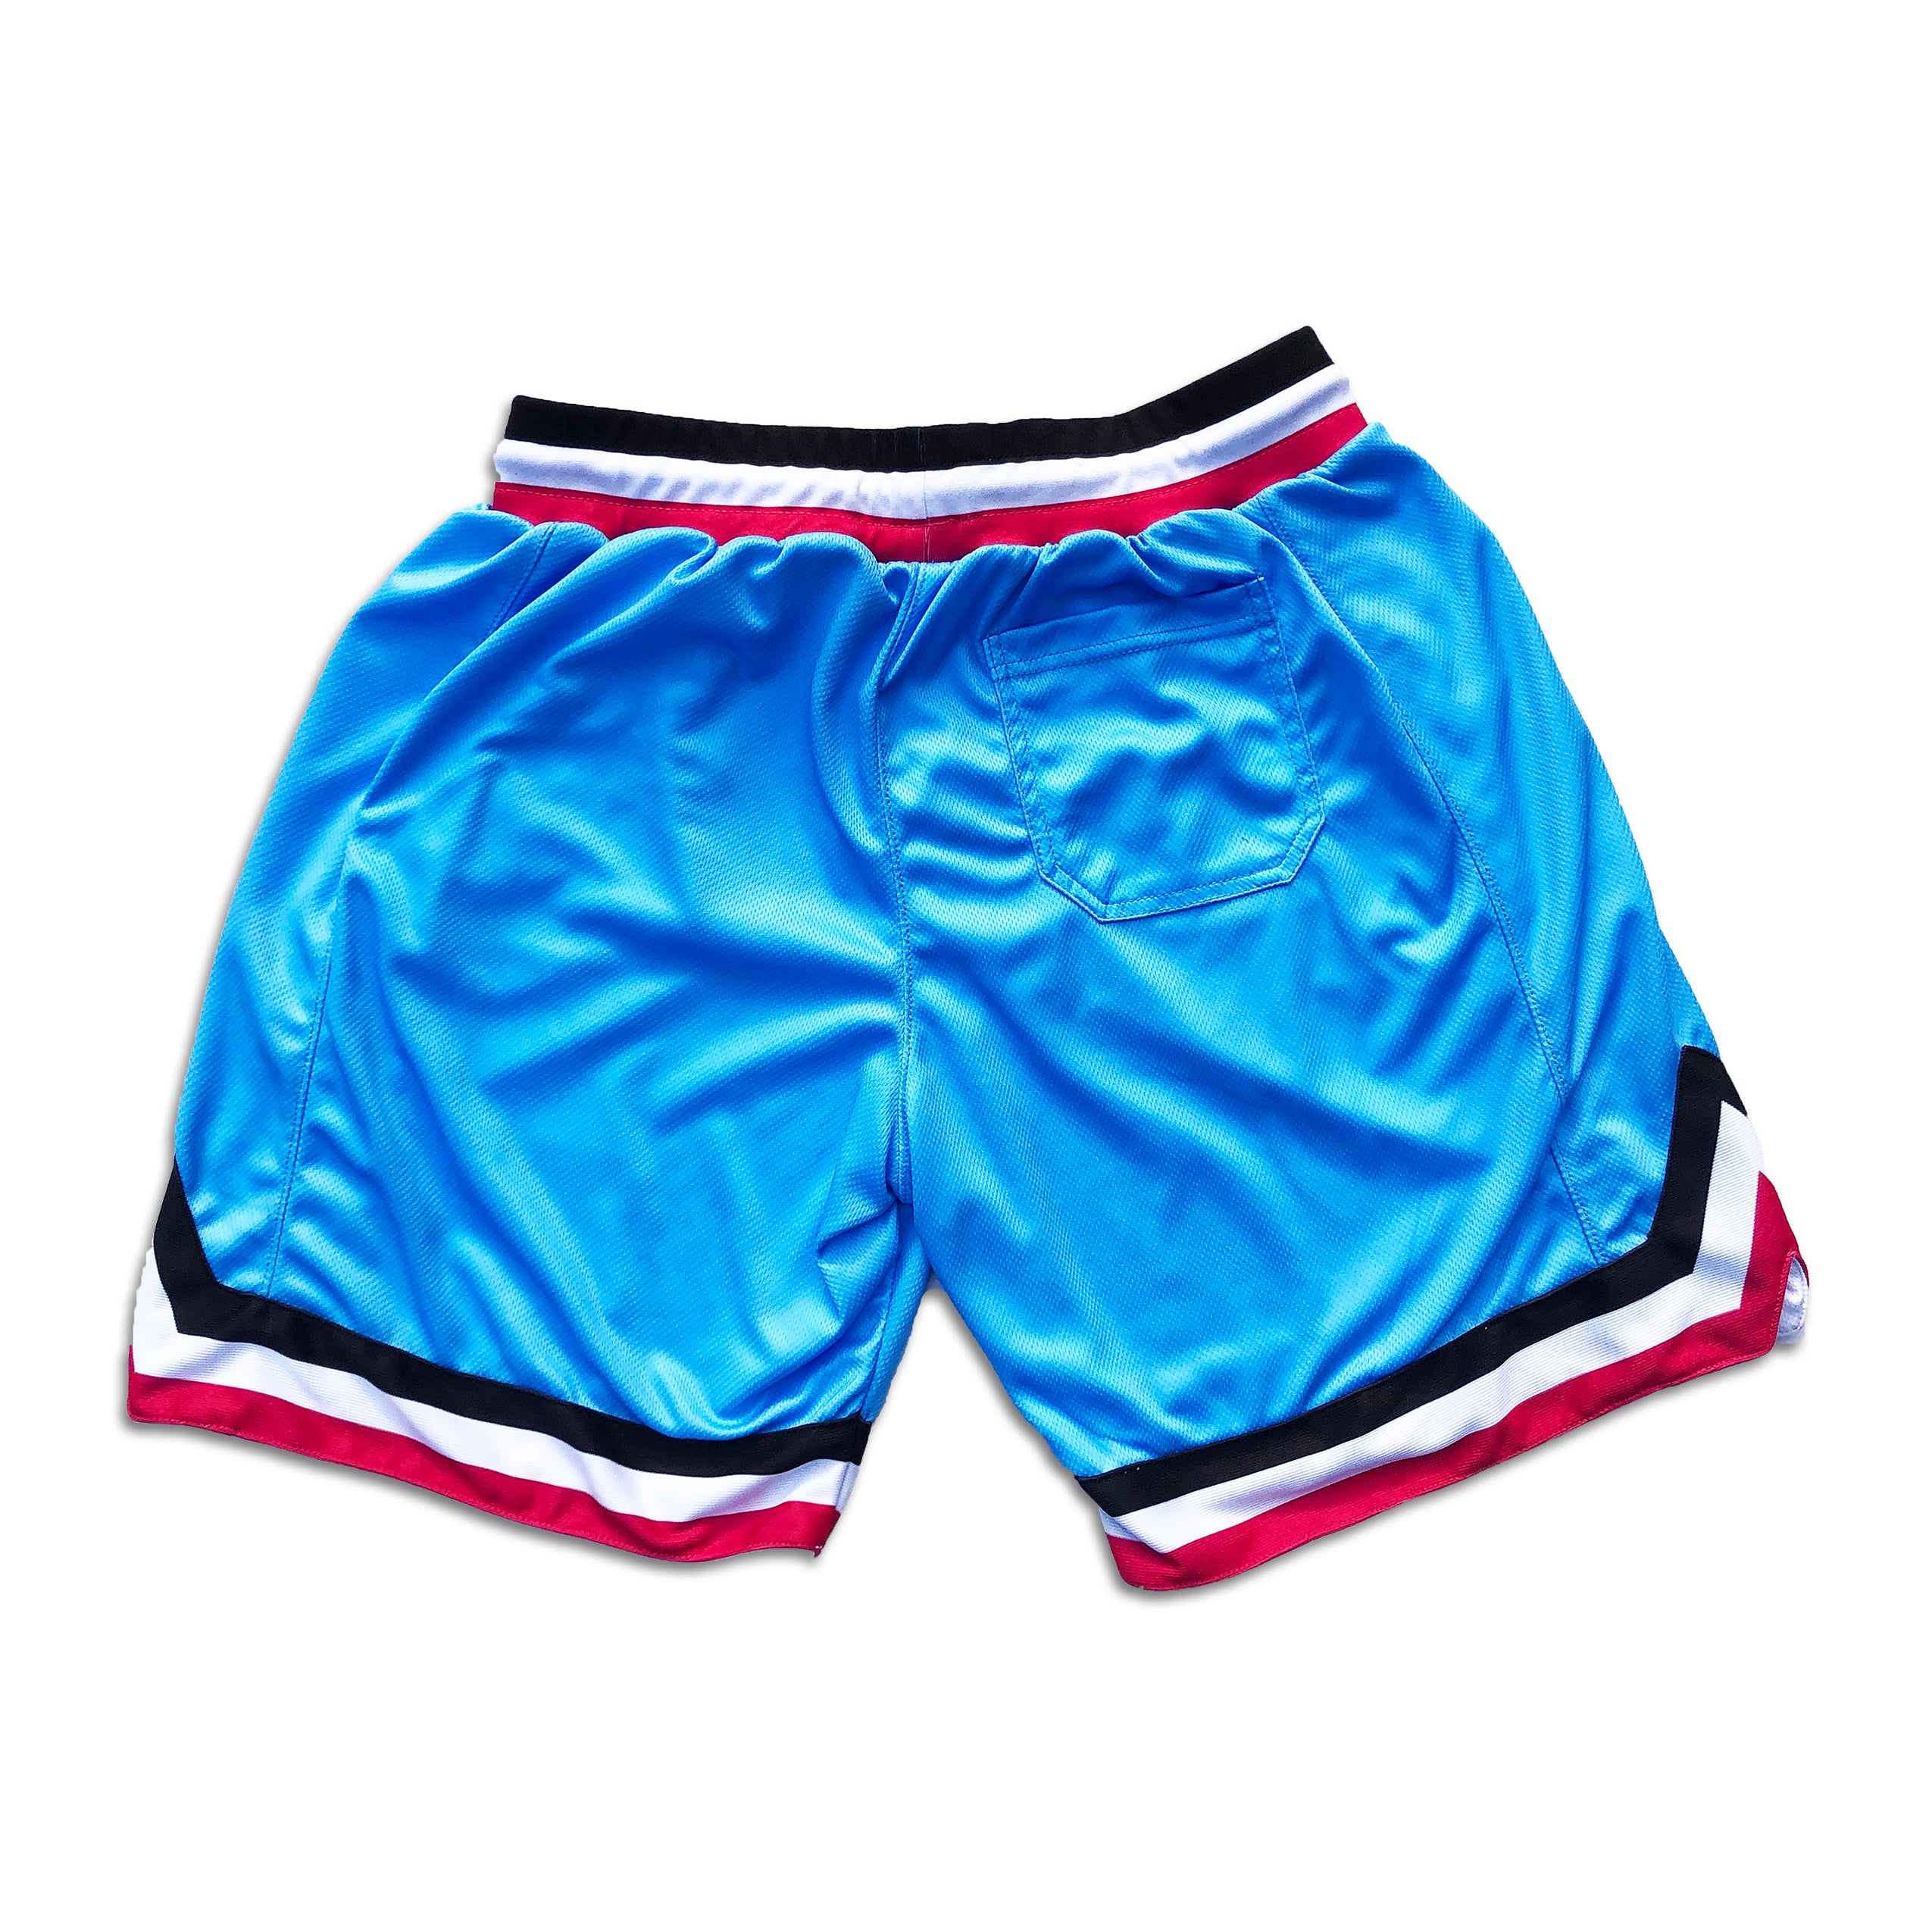 EXCLUSIVE BASKETBALL SHORTS (EXCLUSIVE BLUE)